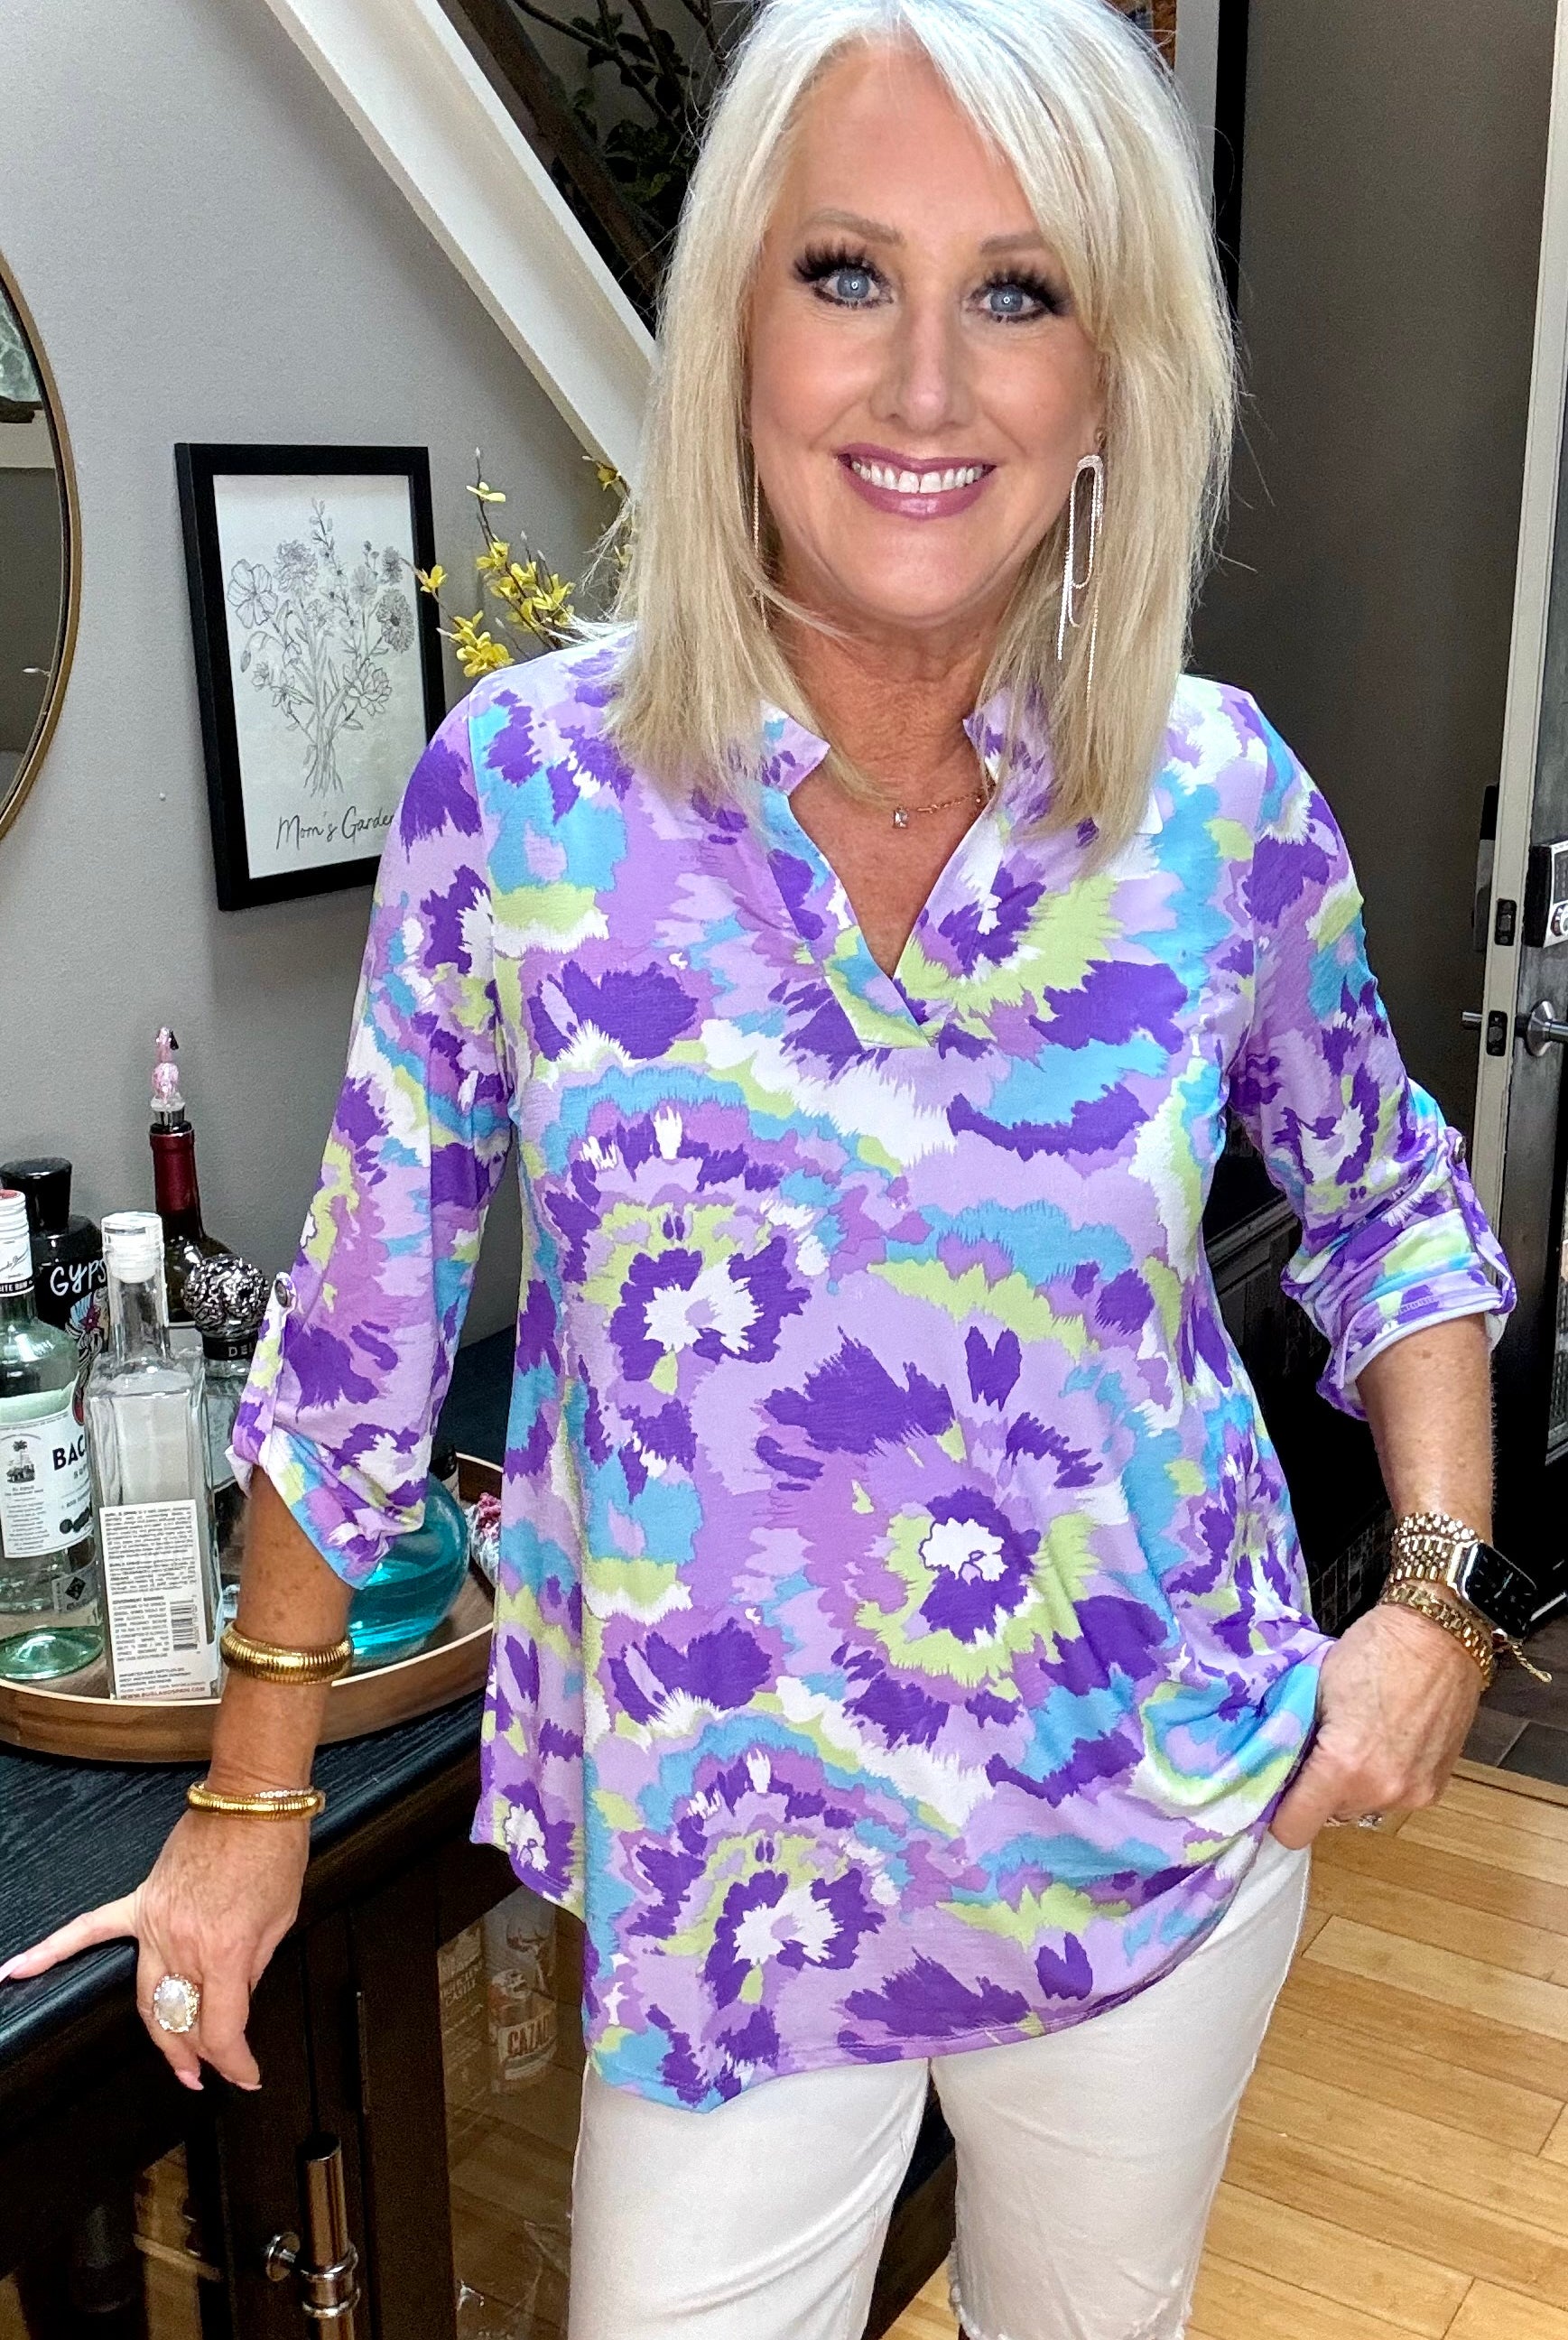 Lizzy Top in Lavender and Purple Brush Strokes-Long Sleeves-Ave Shops-Urban Threadz Boutique, Women's Fashion Boutique in Saugatuck, MI